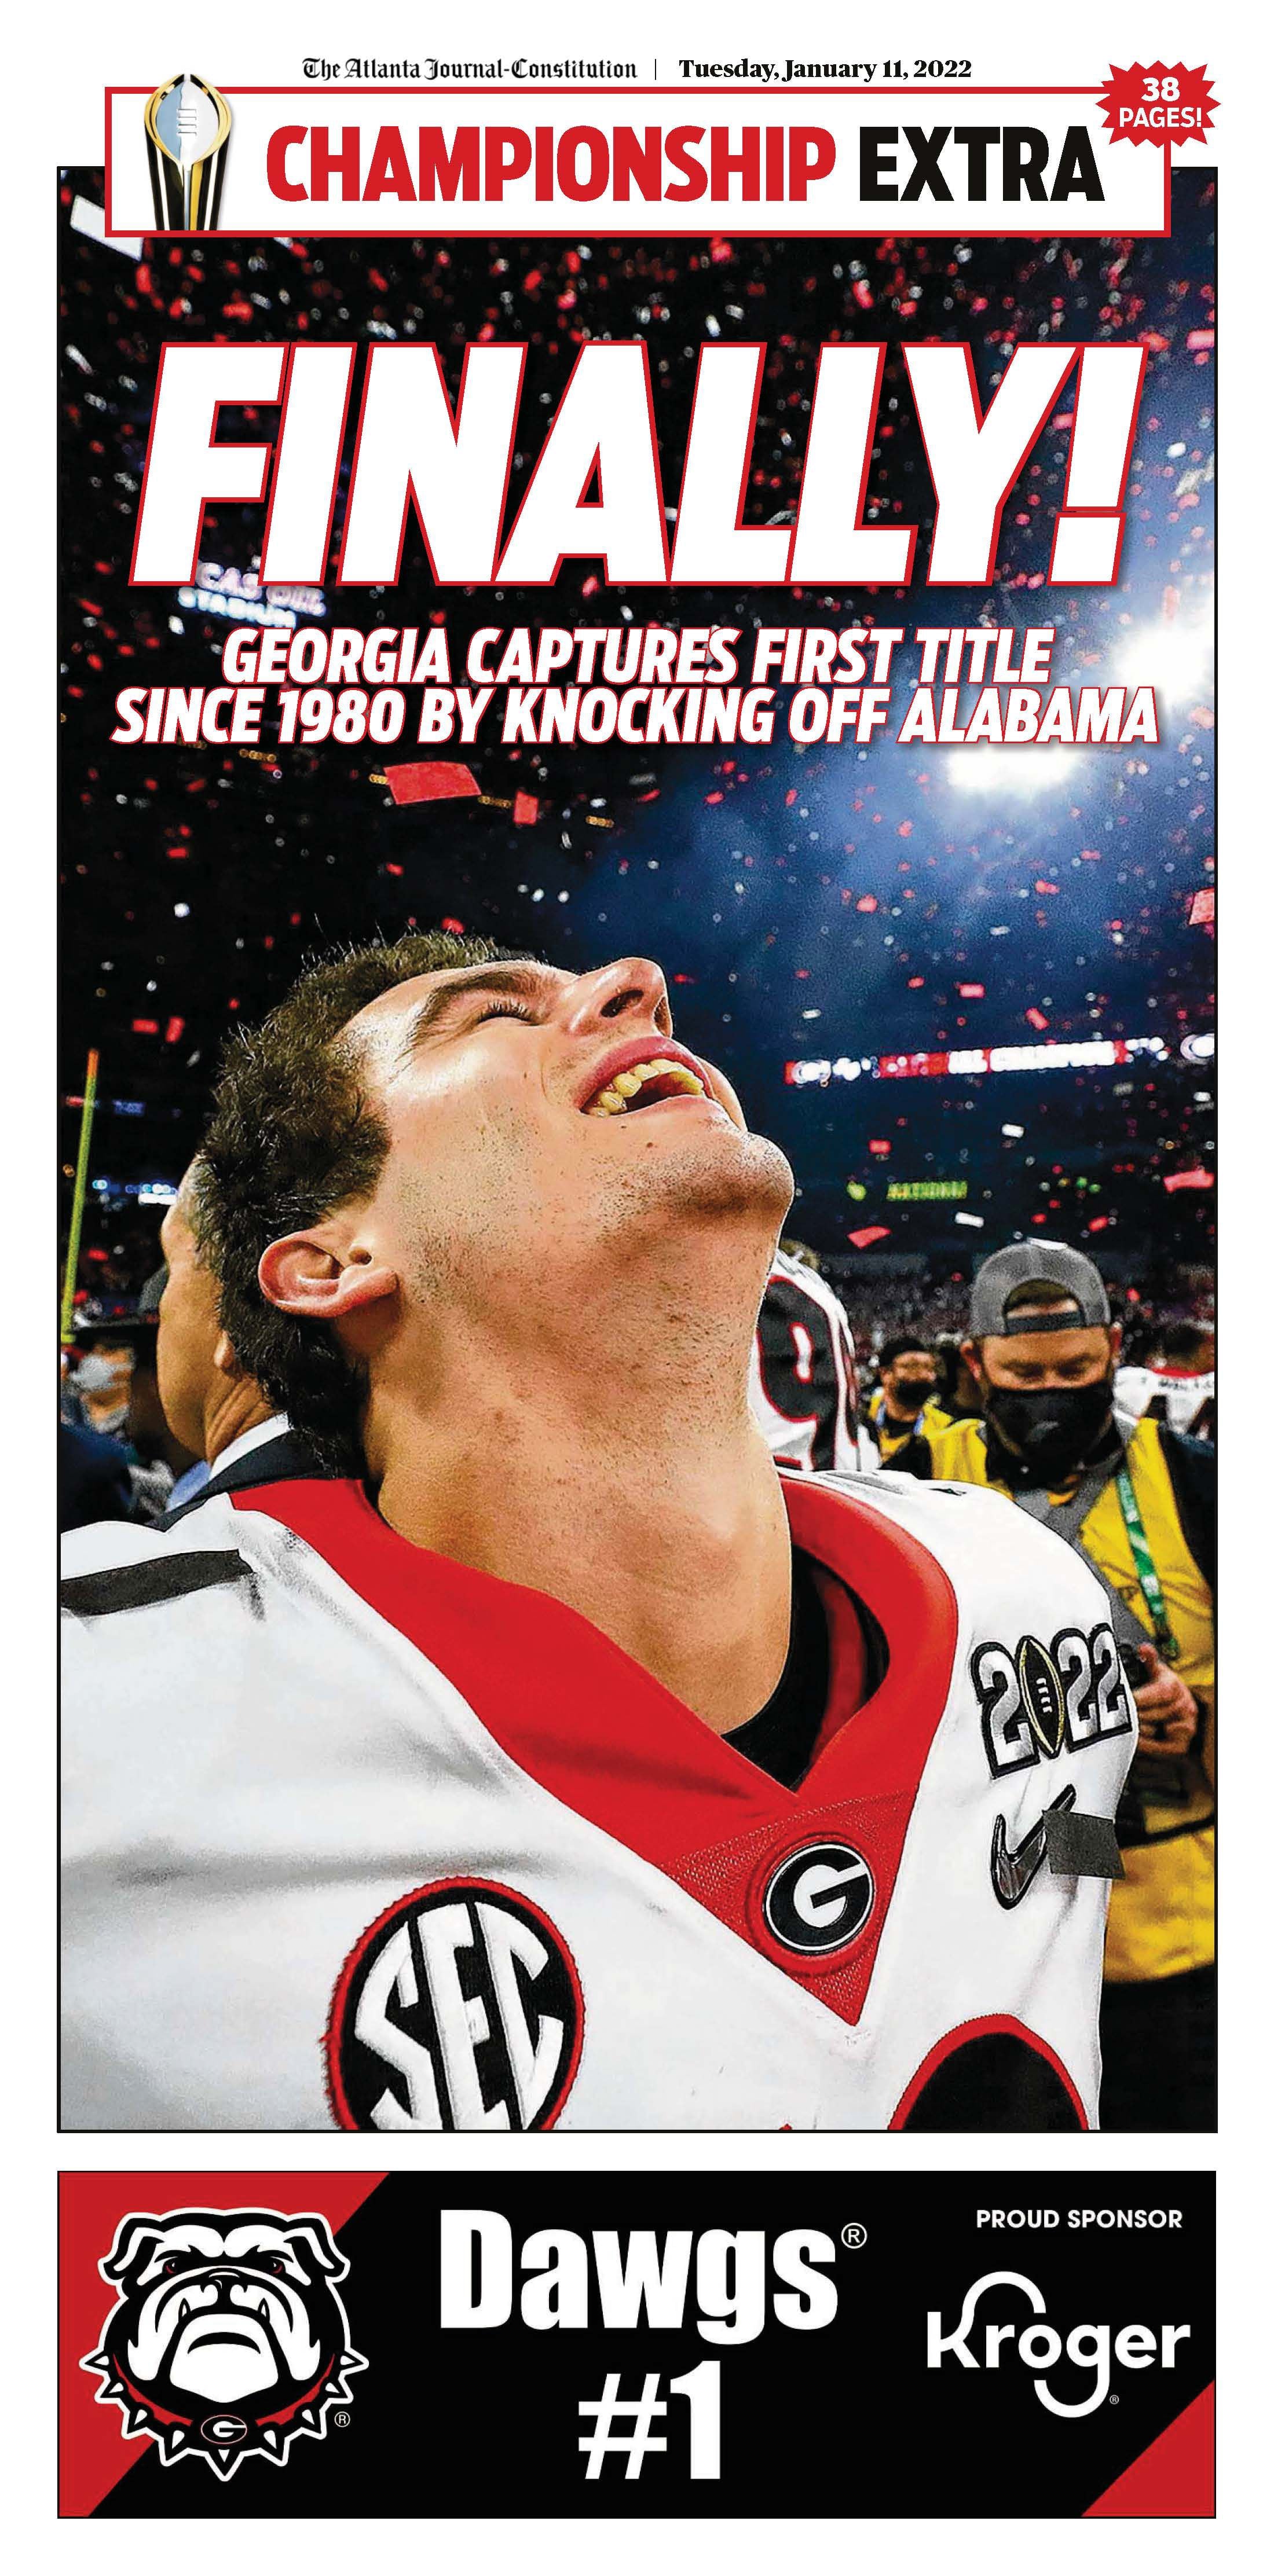 Front page news: See the AJC headline for NL East Champion Atlanta